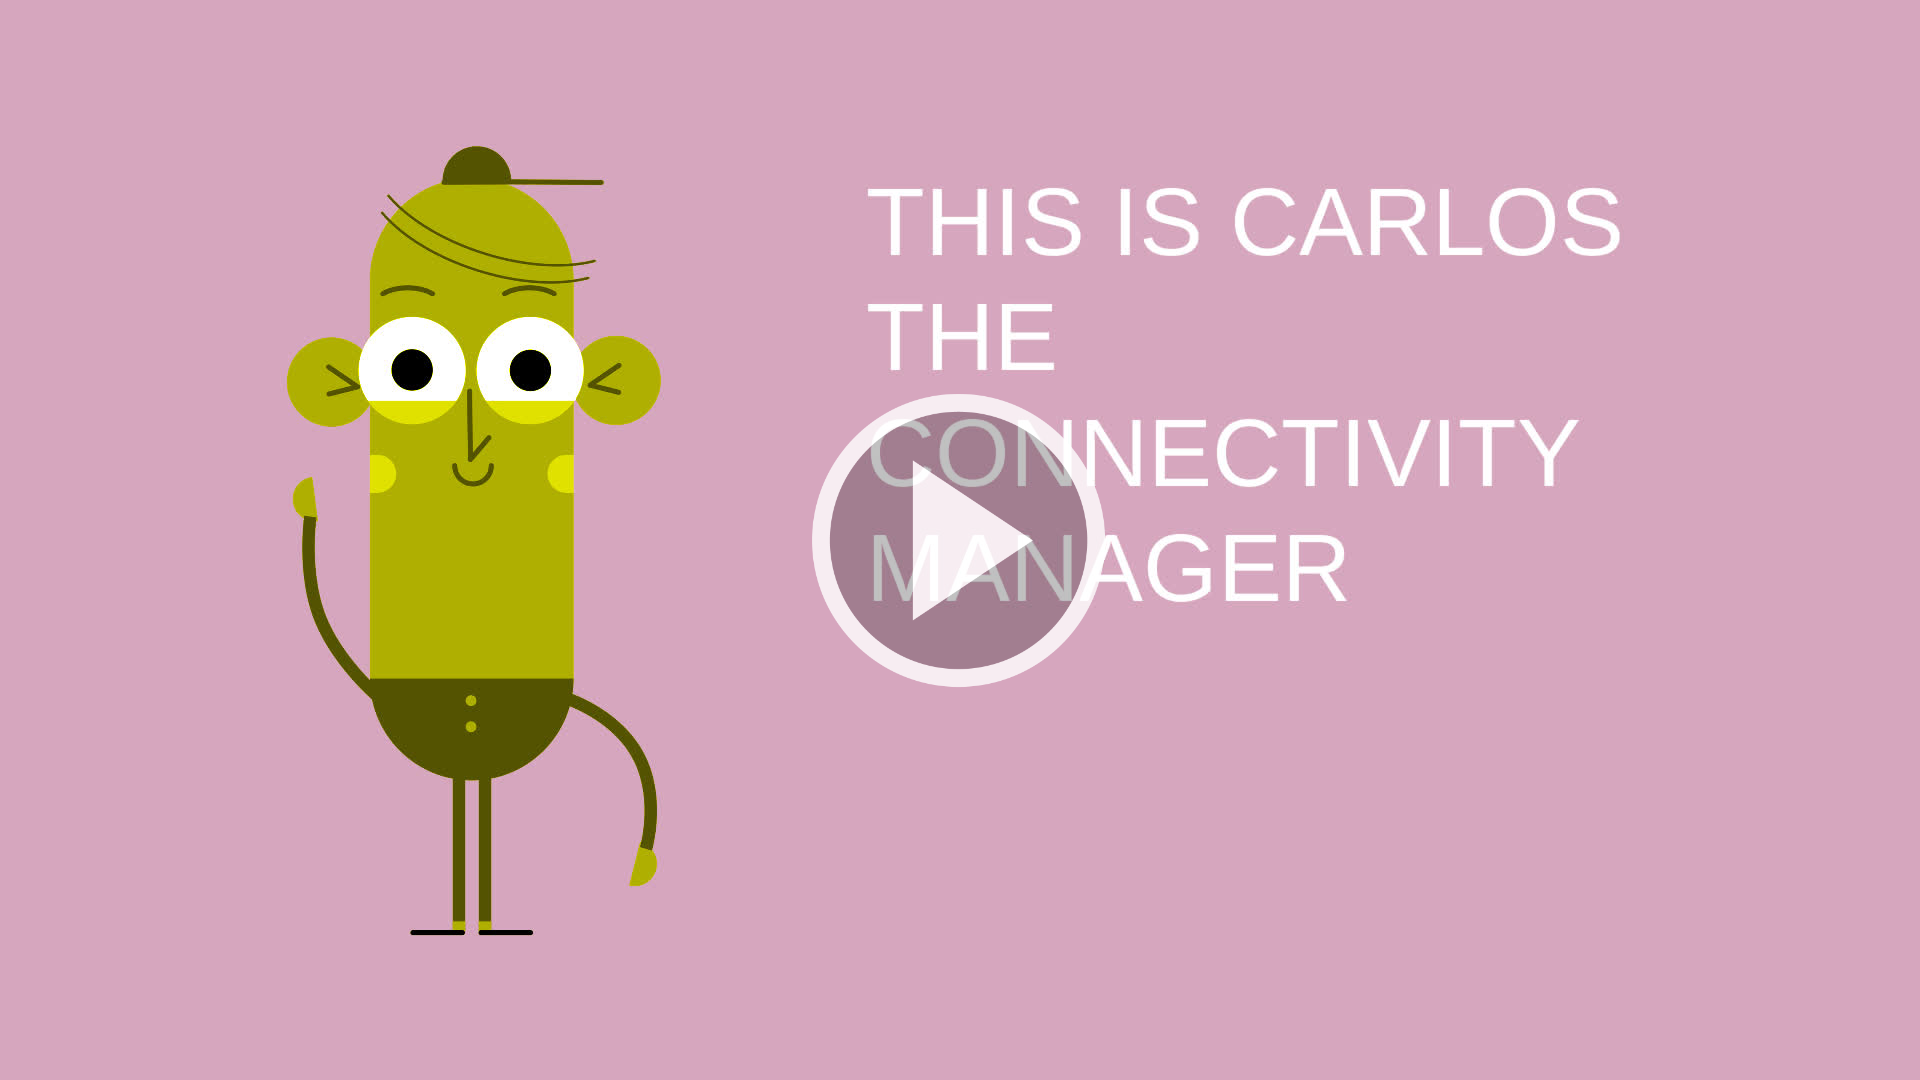 carlos the connectivity manager